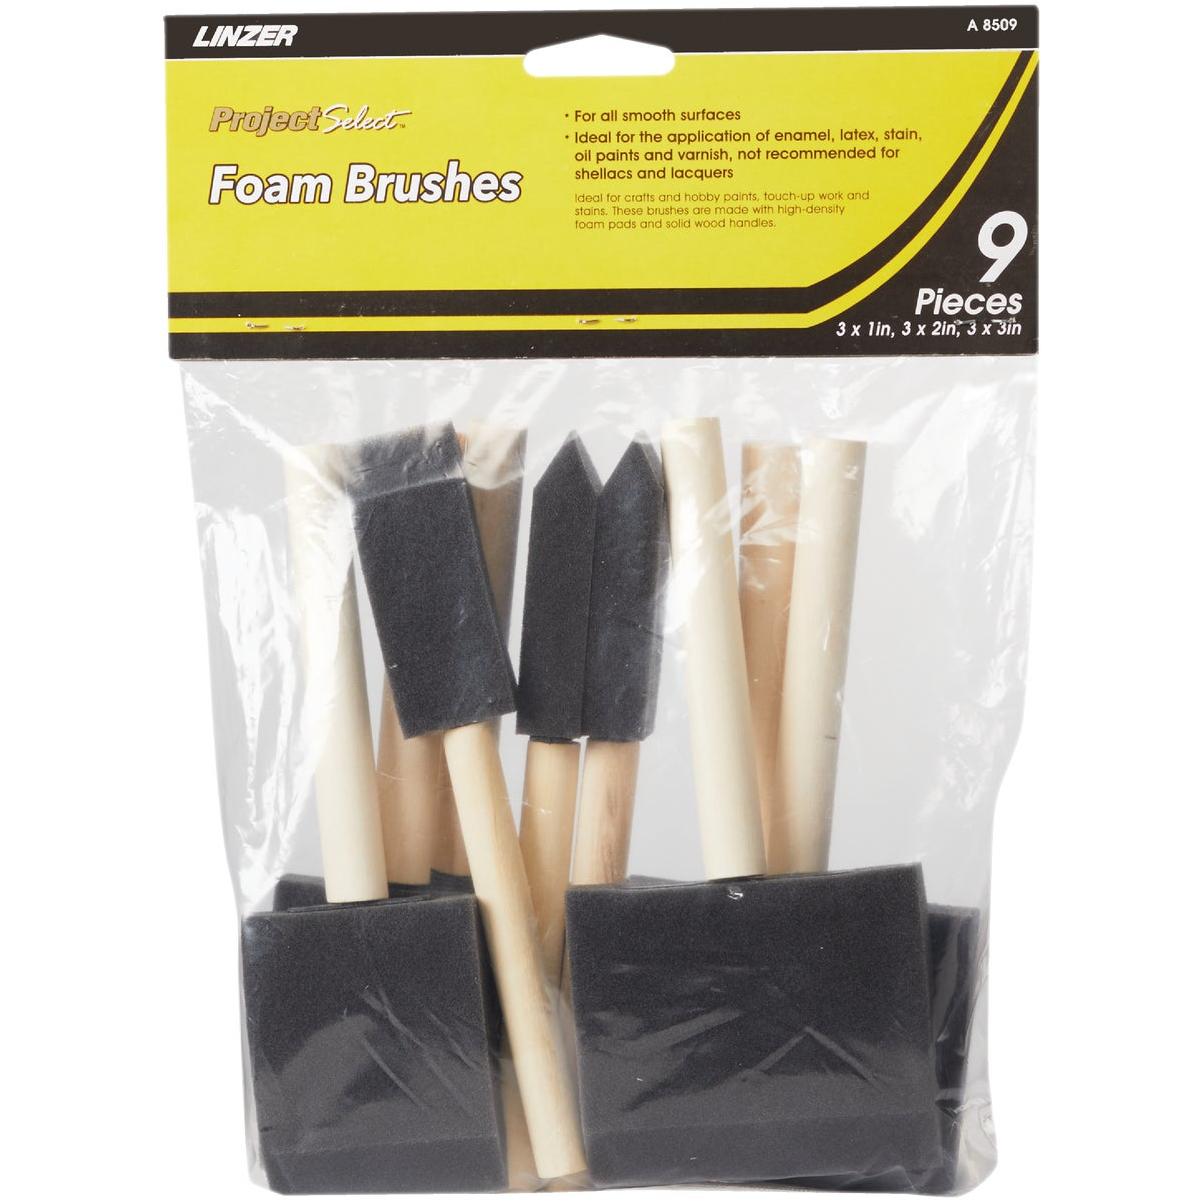 Linzer Project Select 2 in. Flat Paint Brush (12 Pack)